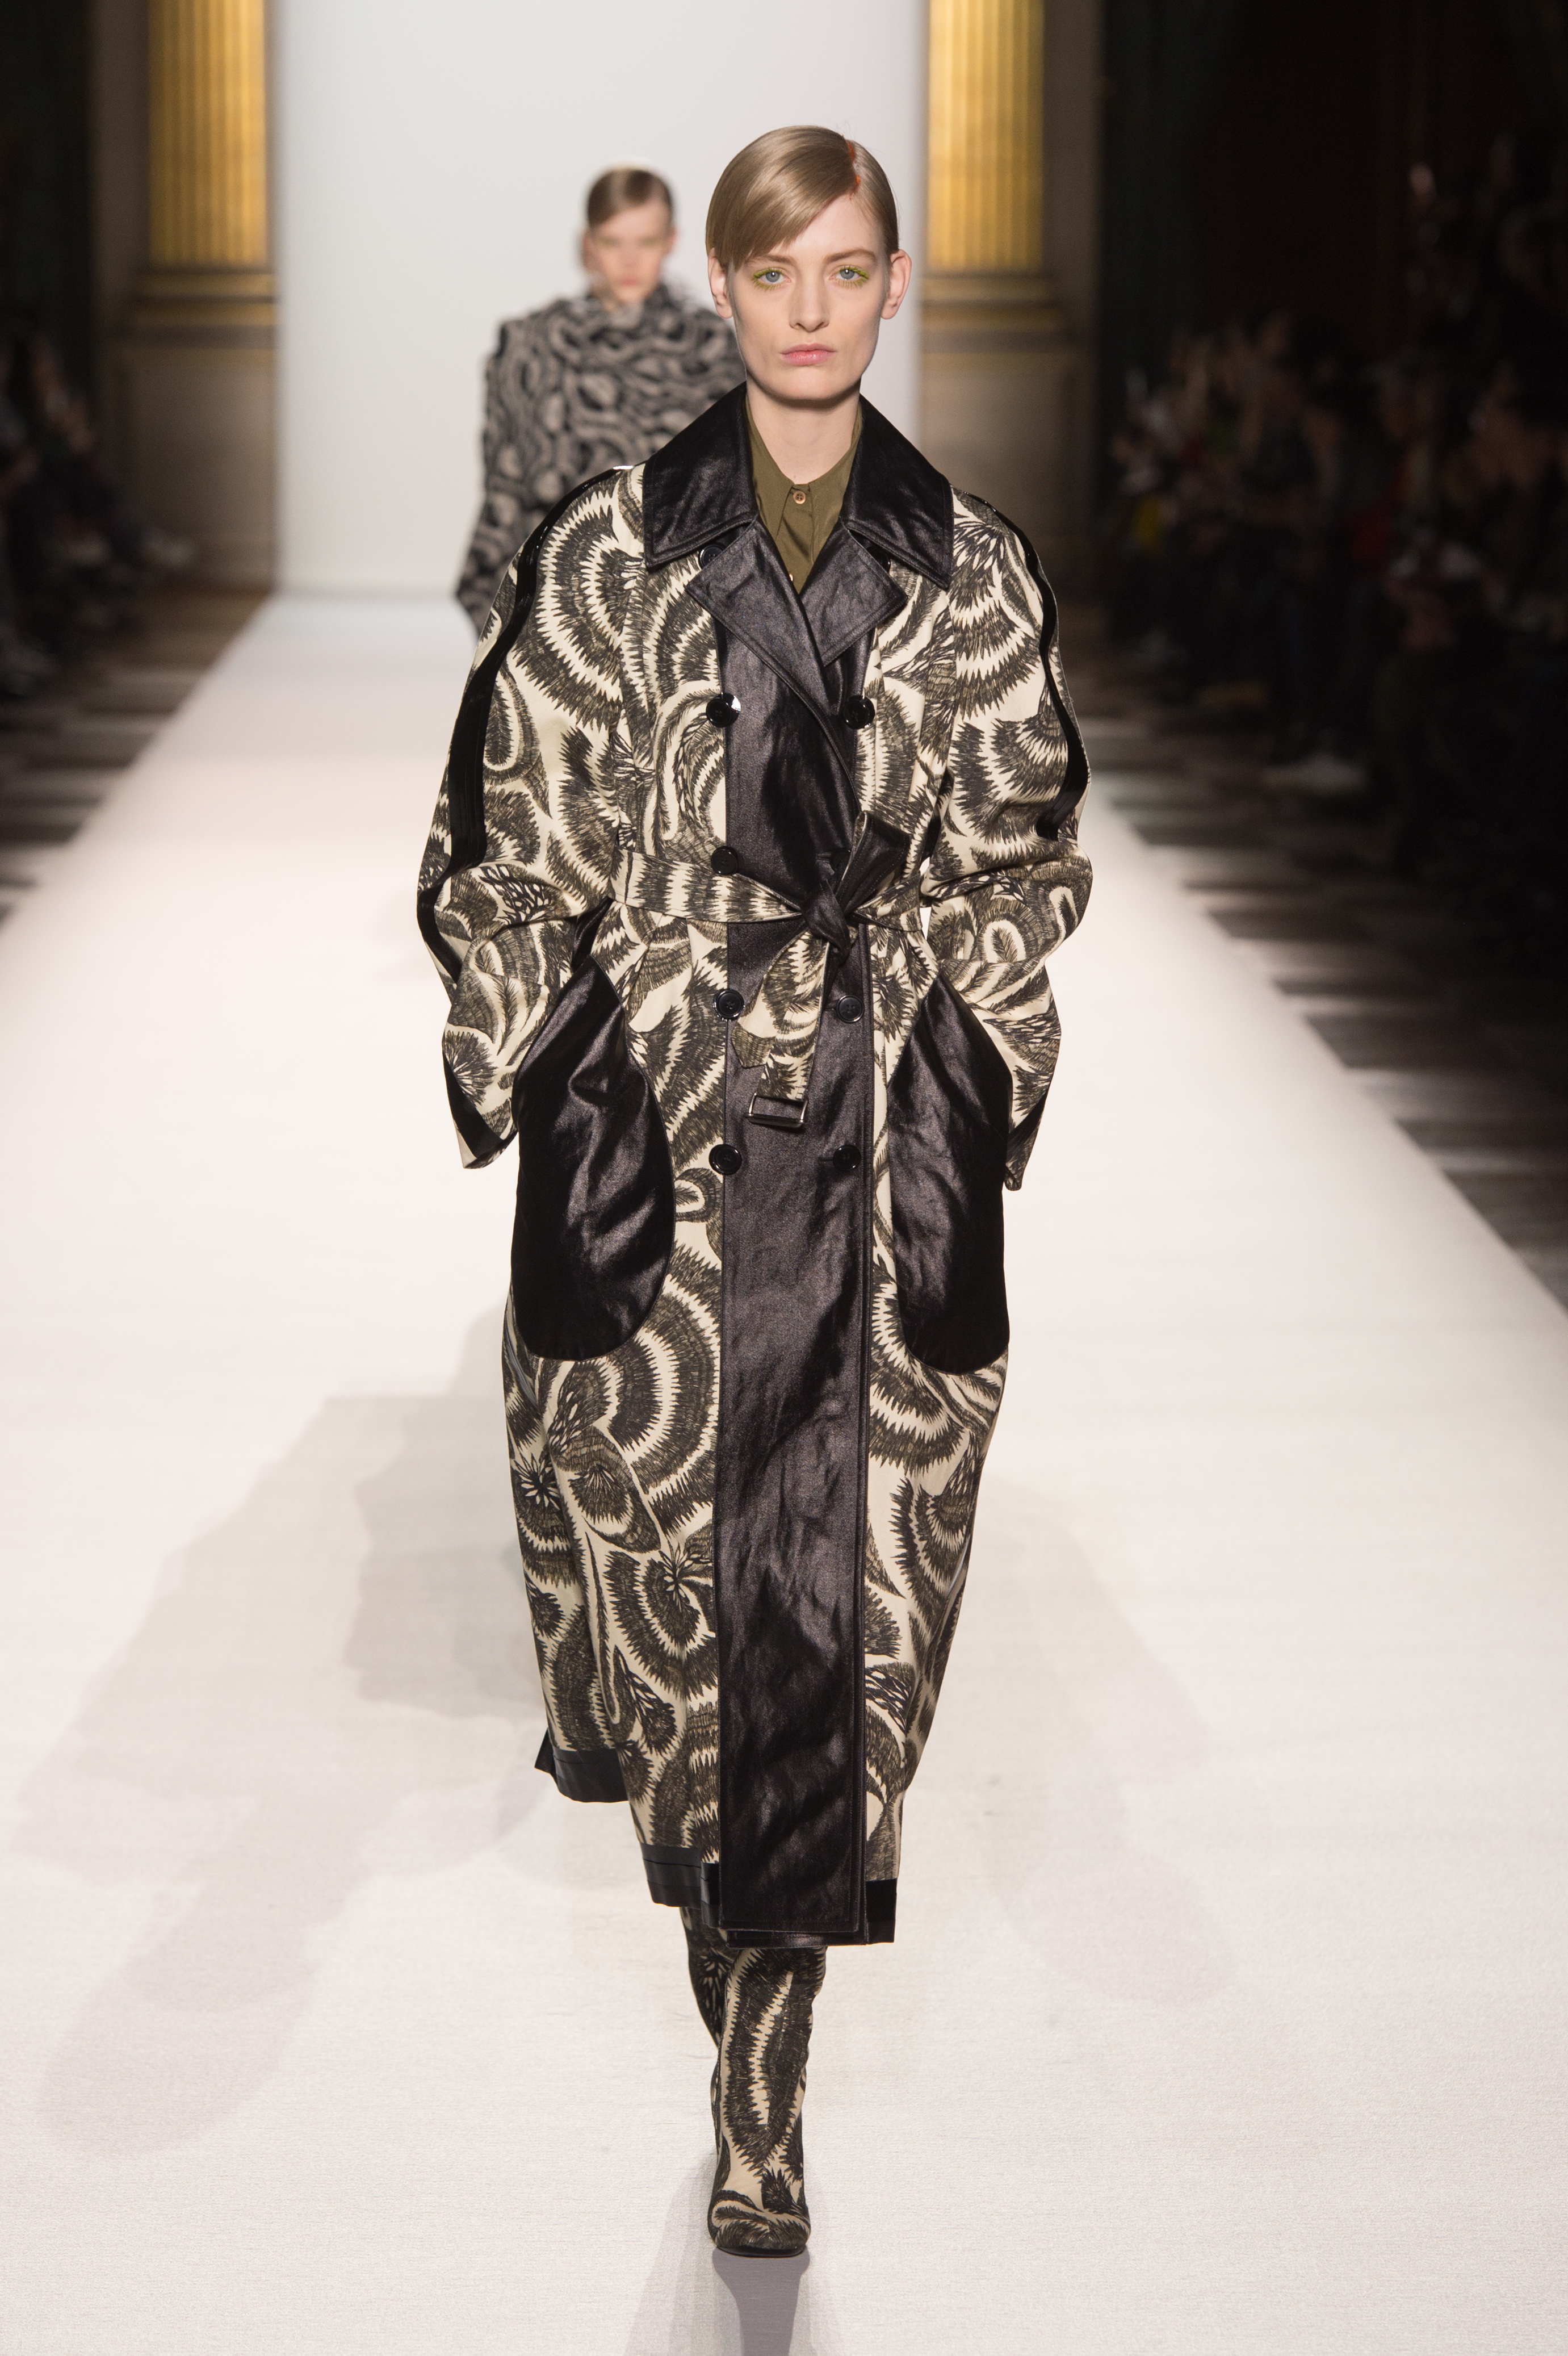 Dries Van Noten Fall 2018 Had the Dreamiest Spring Jackets | Who What Wear